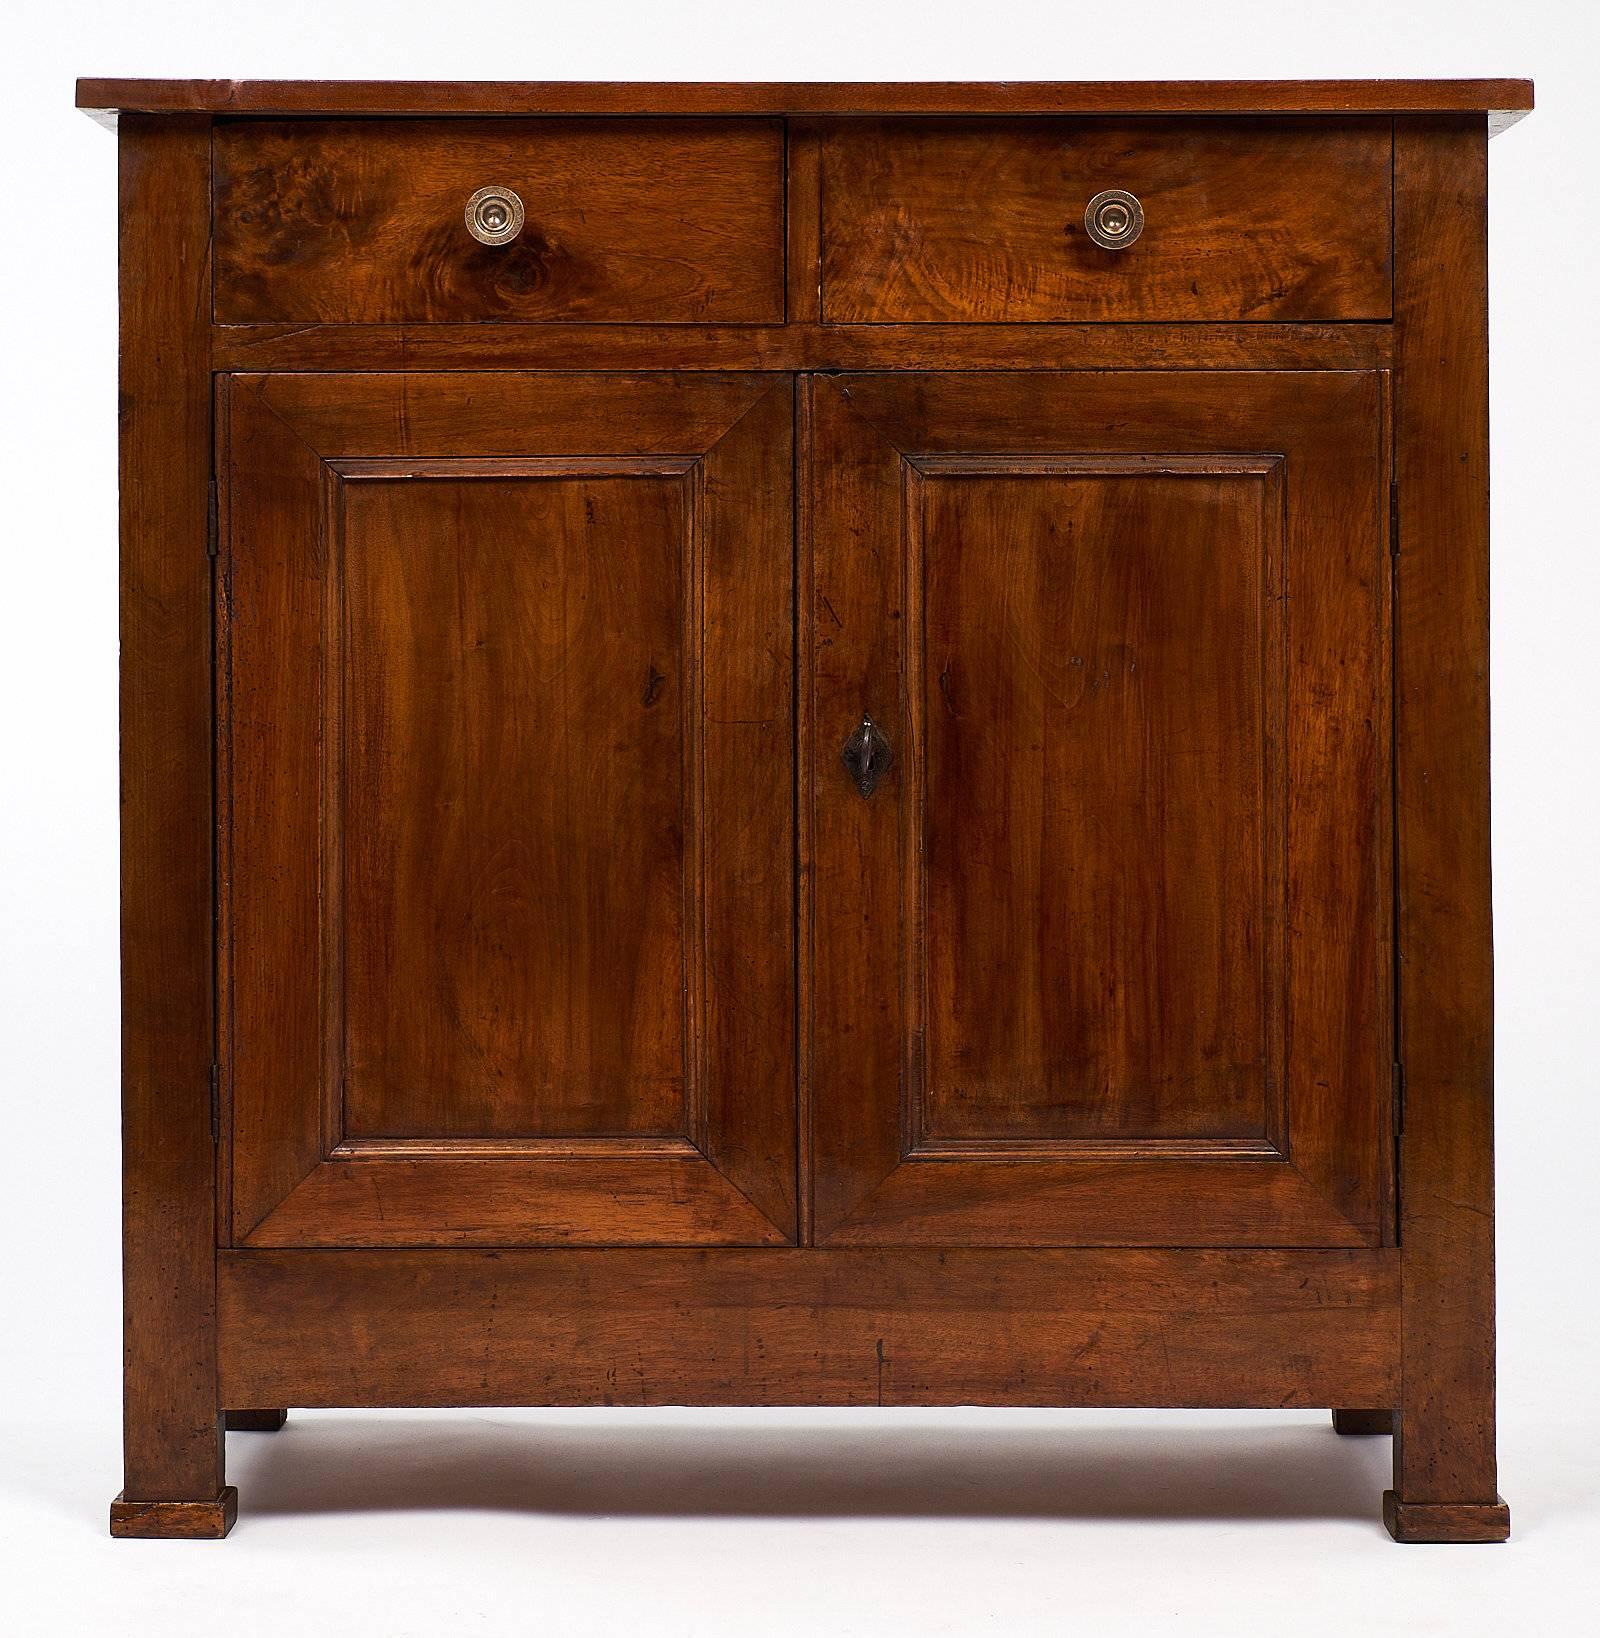 This lovely antique French Restauration period buffet is made of beautiful walnut wood. The piece has two doors below two drawers. The great proportions of the piece also balance well with the fantastic original patina. The lock and key are in